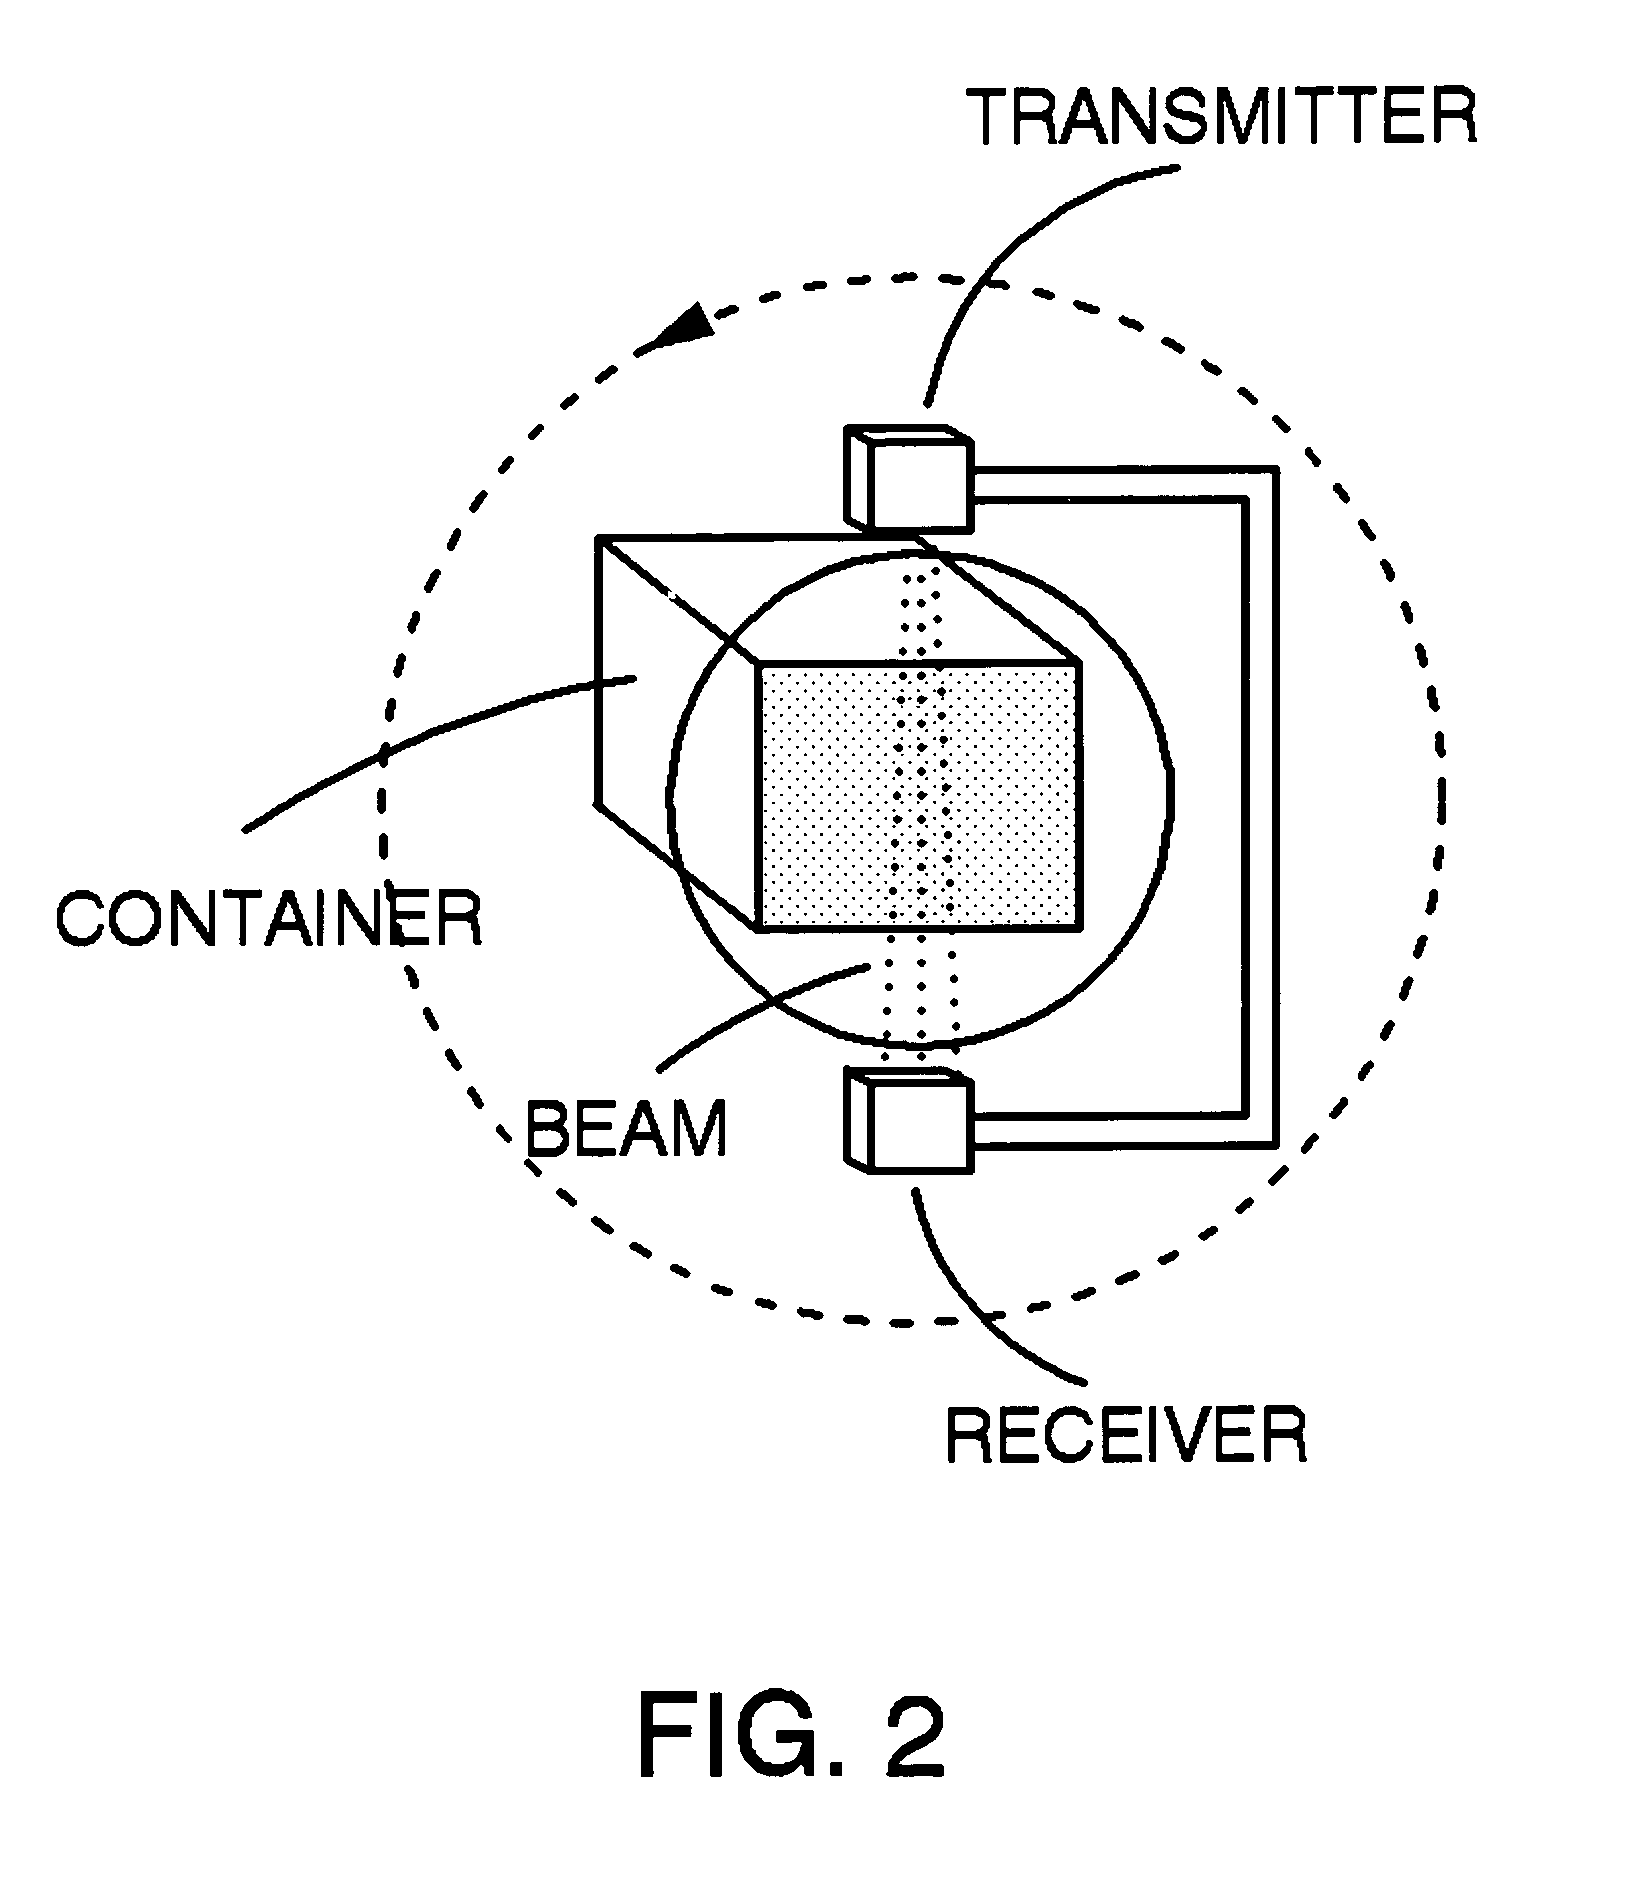 System and method for detecting nuclear material in shipping containers